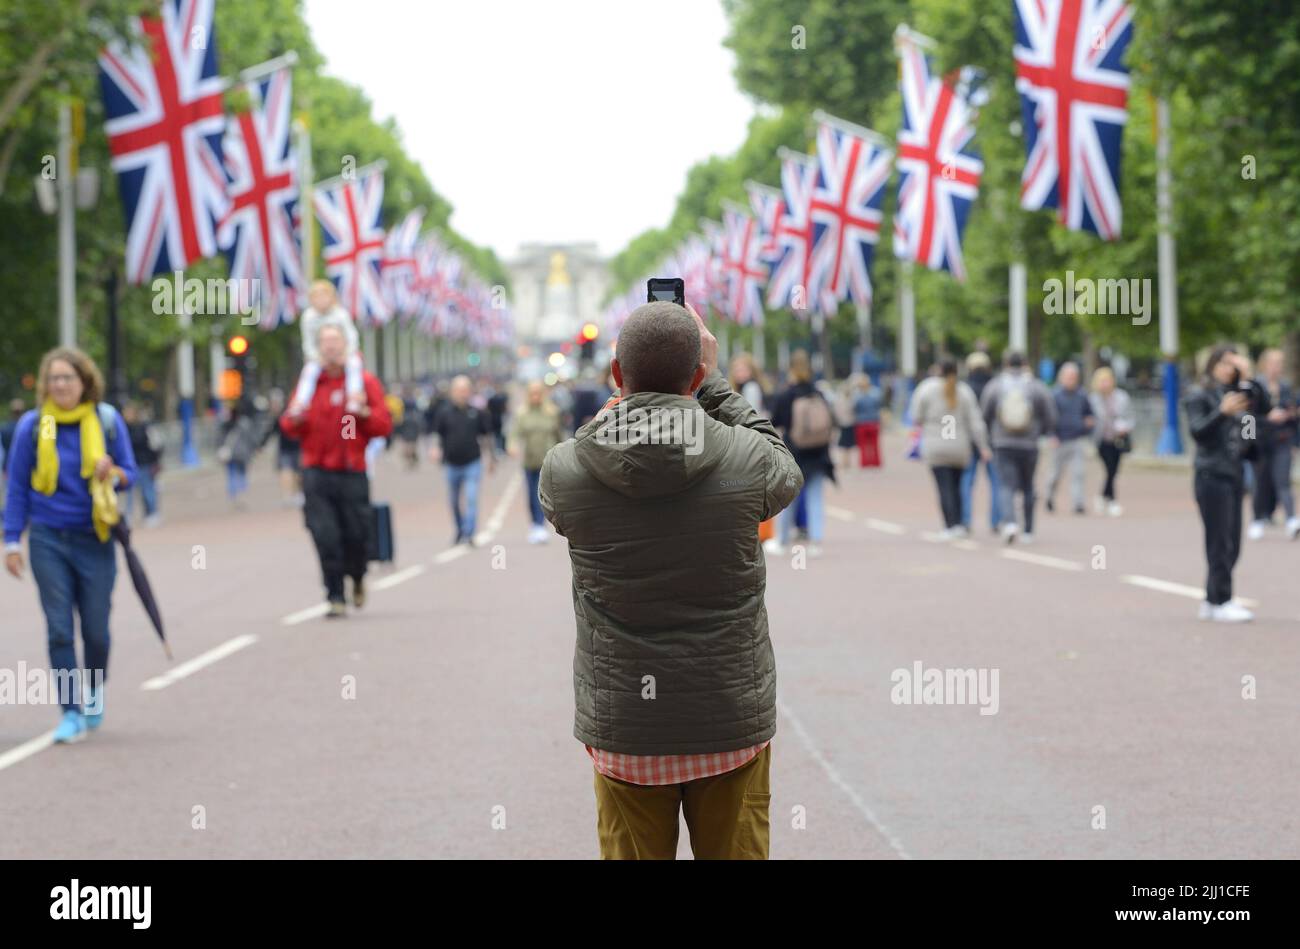 London, England, UK. People in The Mall while it is closed to traffic before the Queen's Platinum Jubilee celebrations, 30th May 2022 Stock Photo